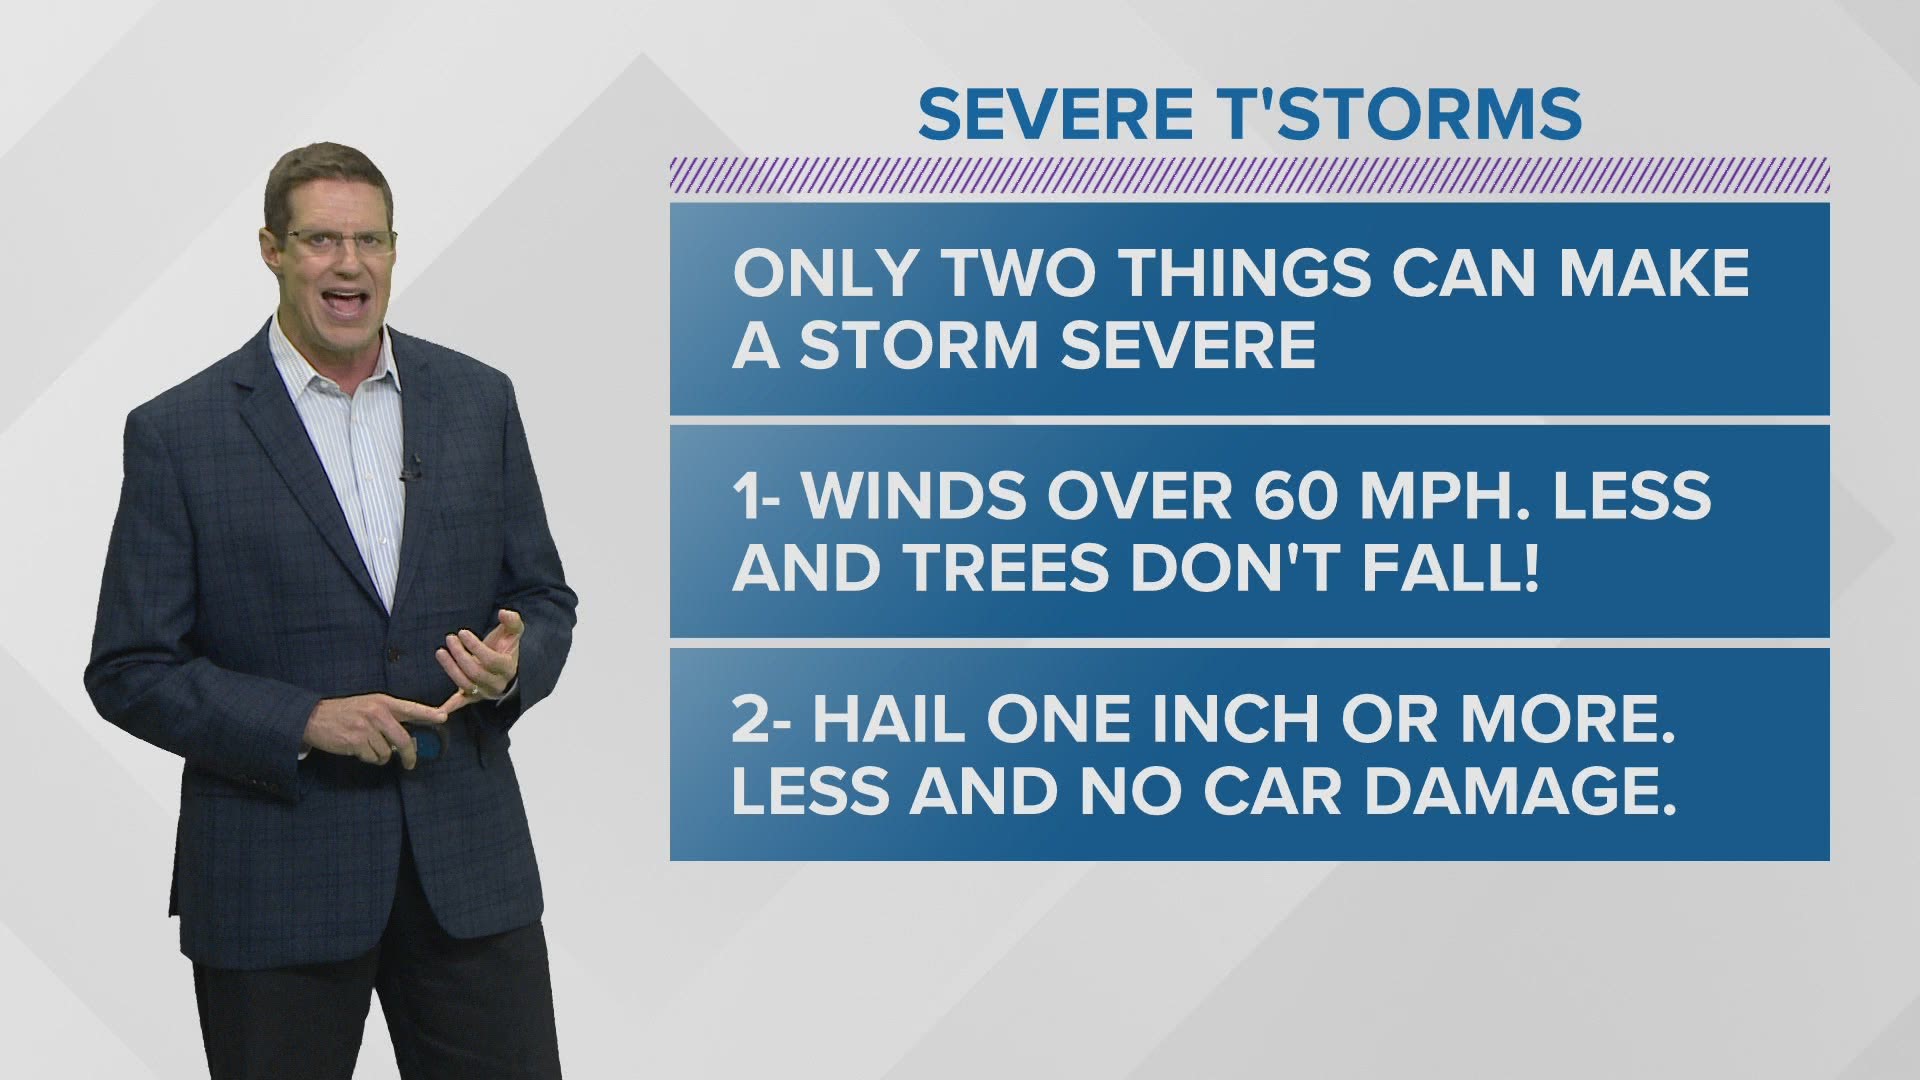 Why are some storms classified as "severe," and when do we cut-in during programming to cover them?